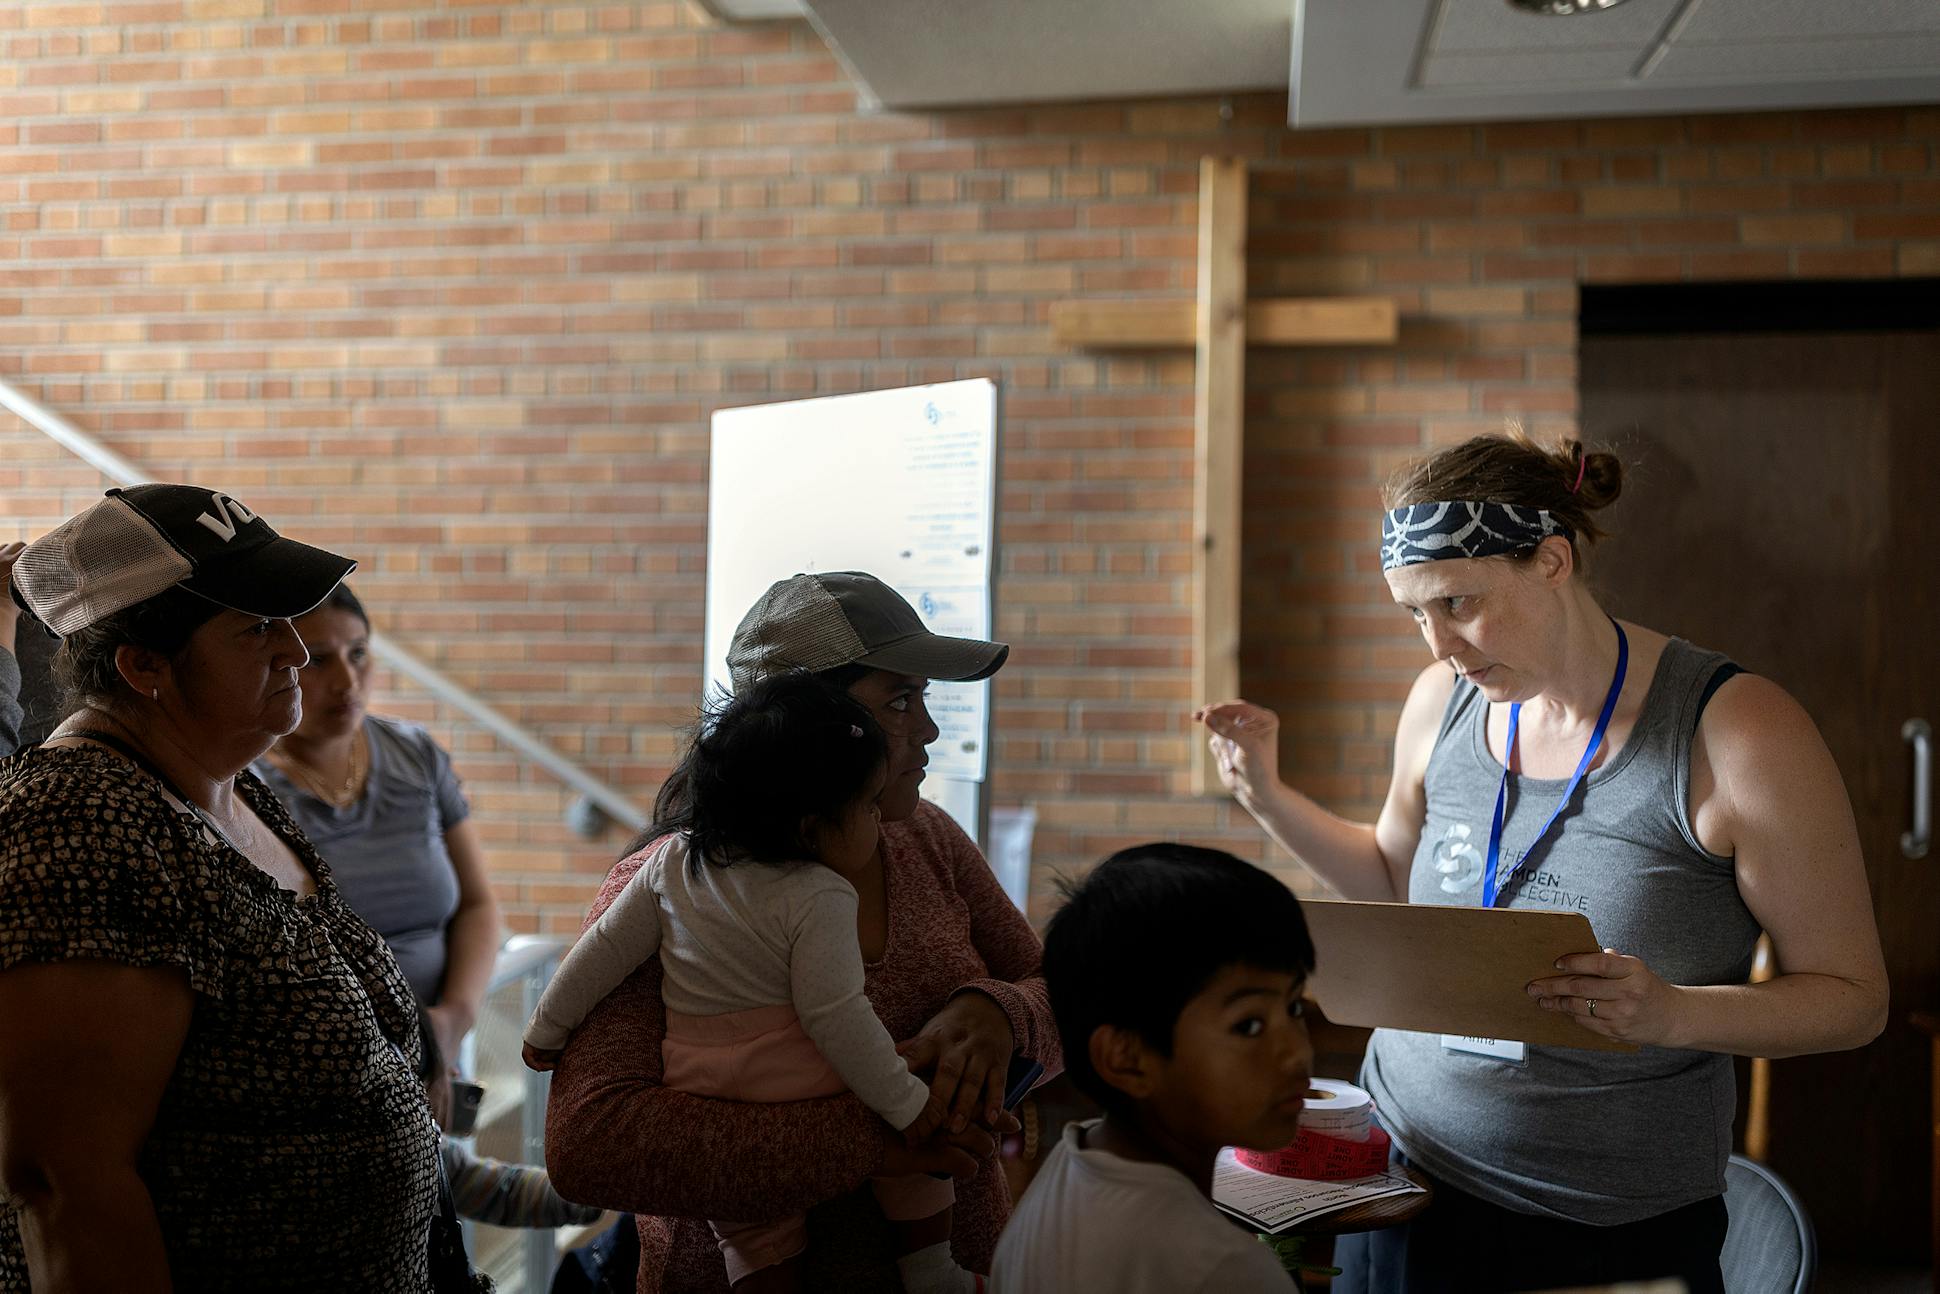 Anna directs people, mostly Ecuadorians, on how to get food from the food shelf that she runs in Minneapolis.